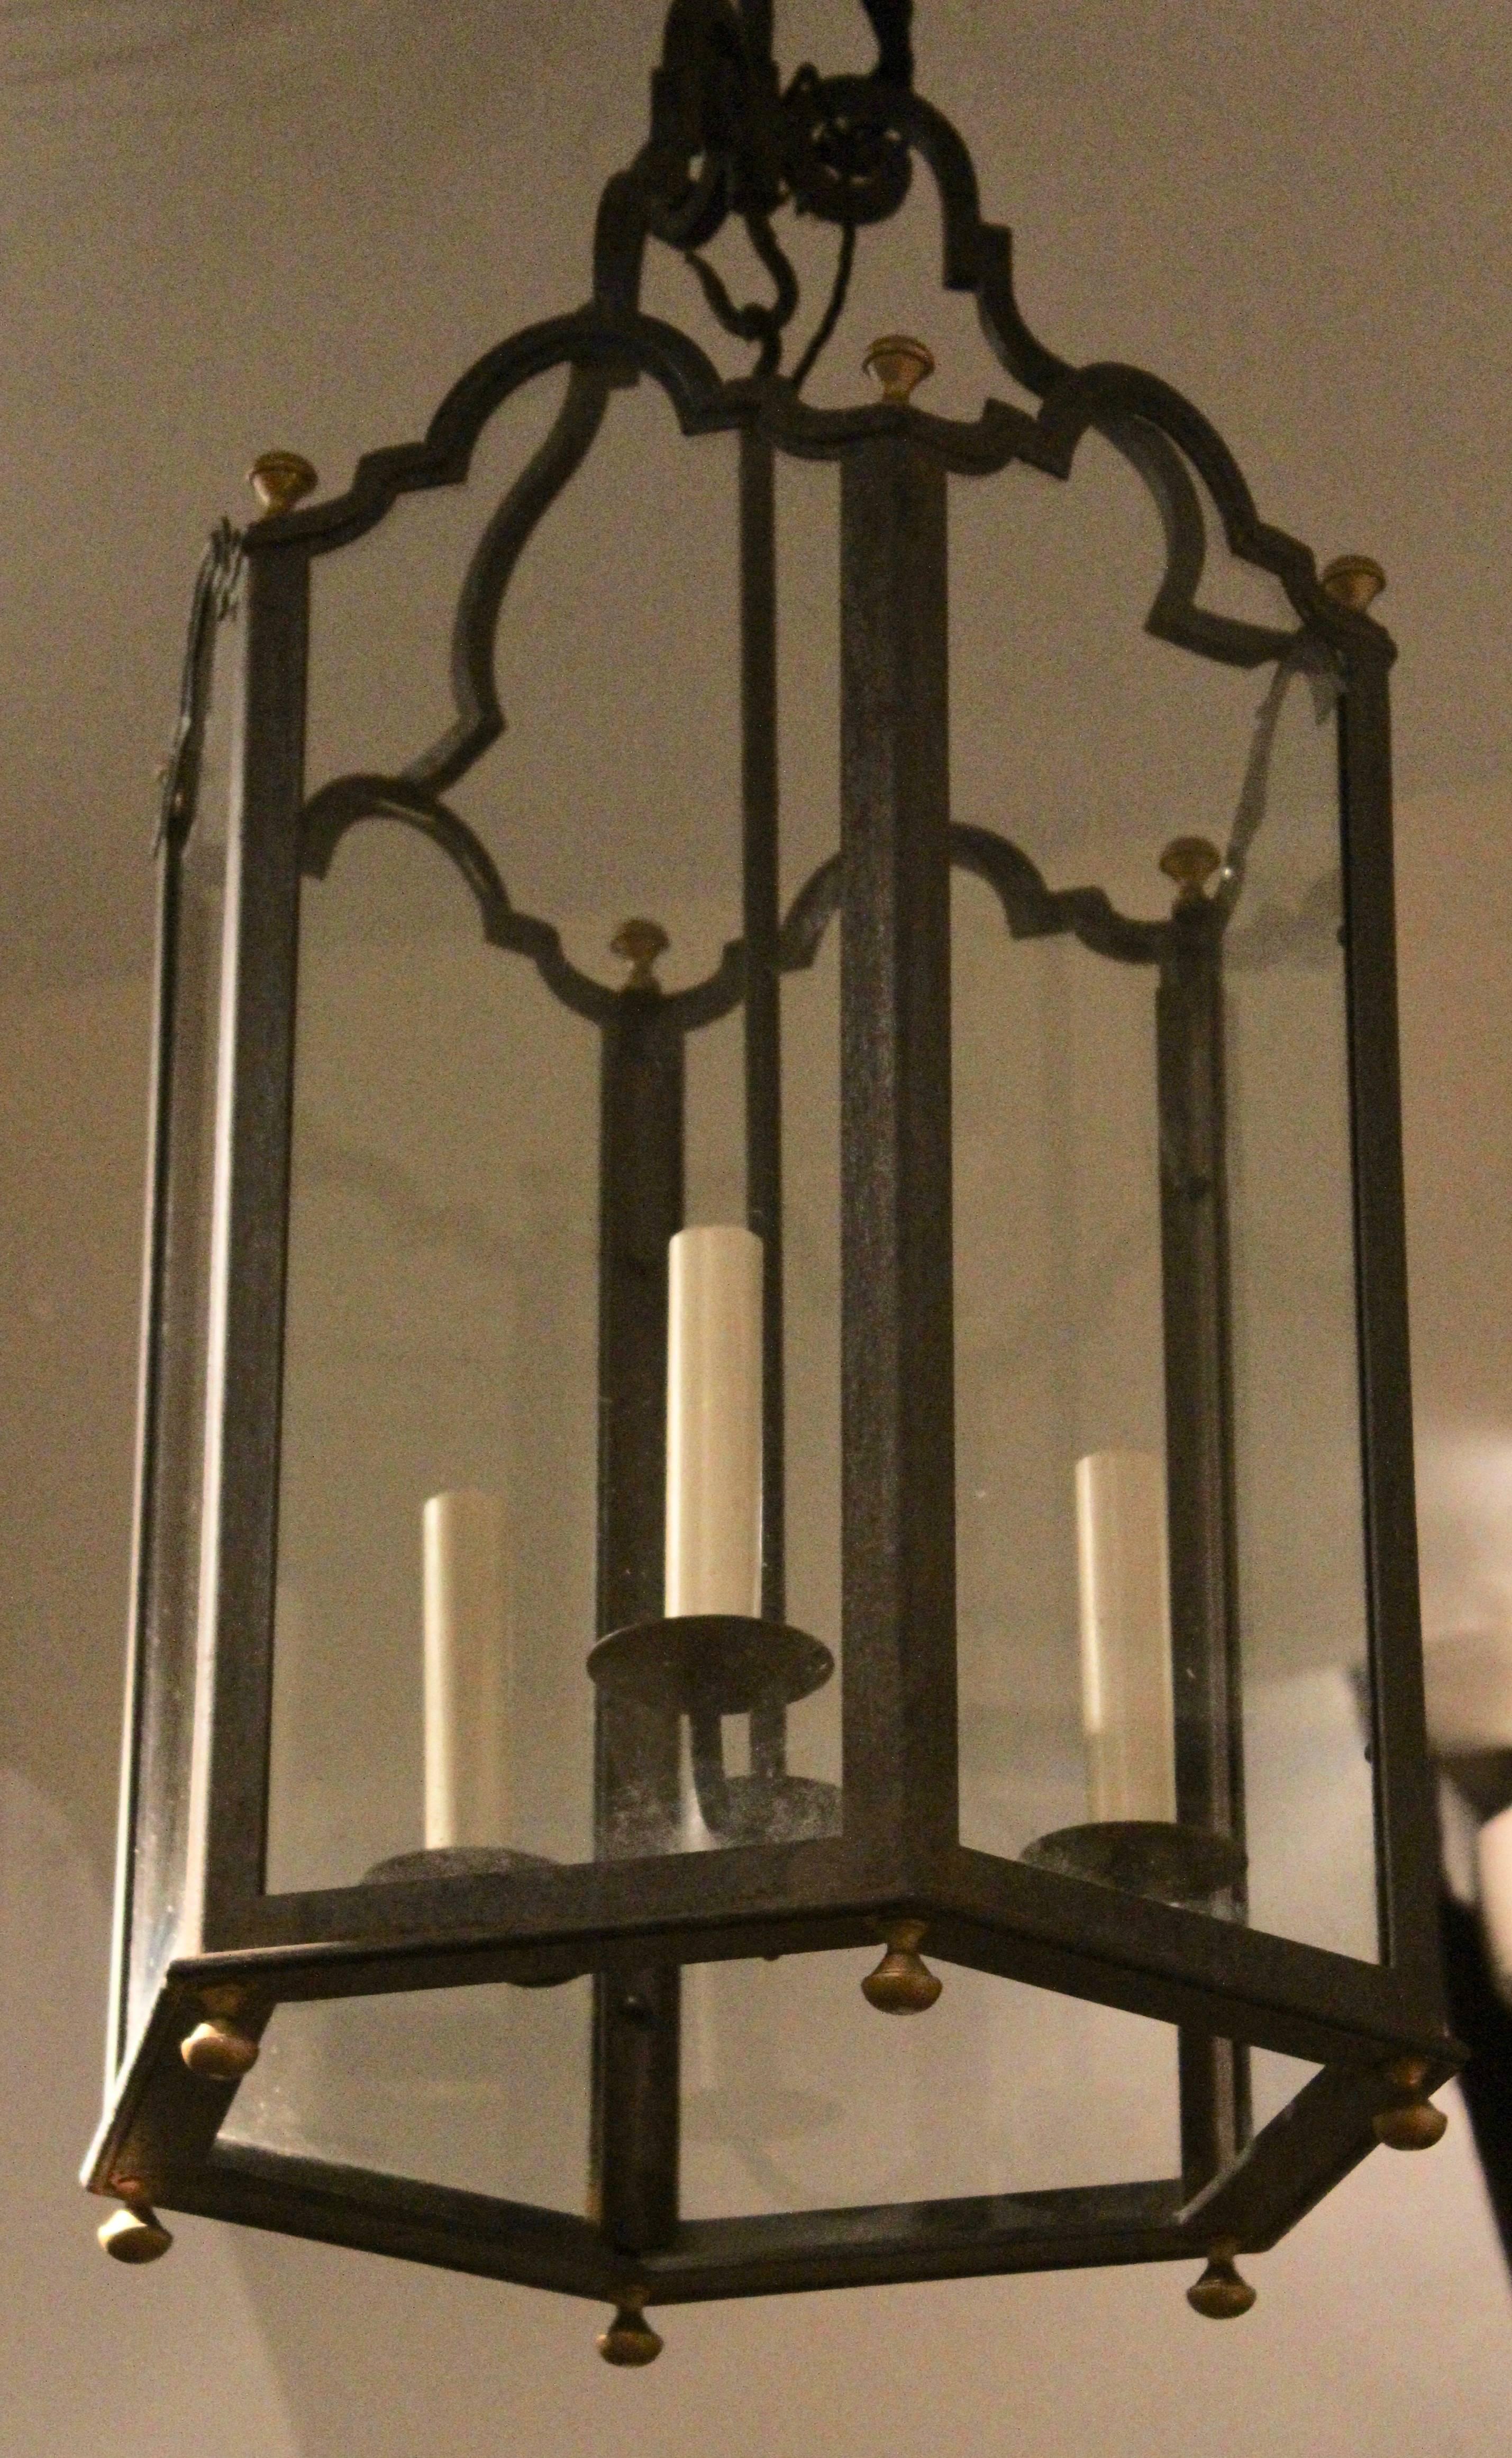 Pair of French hexagonal wrought iron lanterns, circa 1930. Each glass pane with a simple wrought iron frame finished with a stepped arch top. Each corner, top and bottom punctuate with polished brass finials at the corner of each point. Four